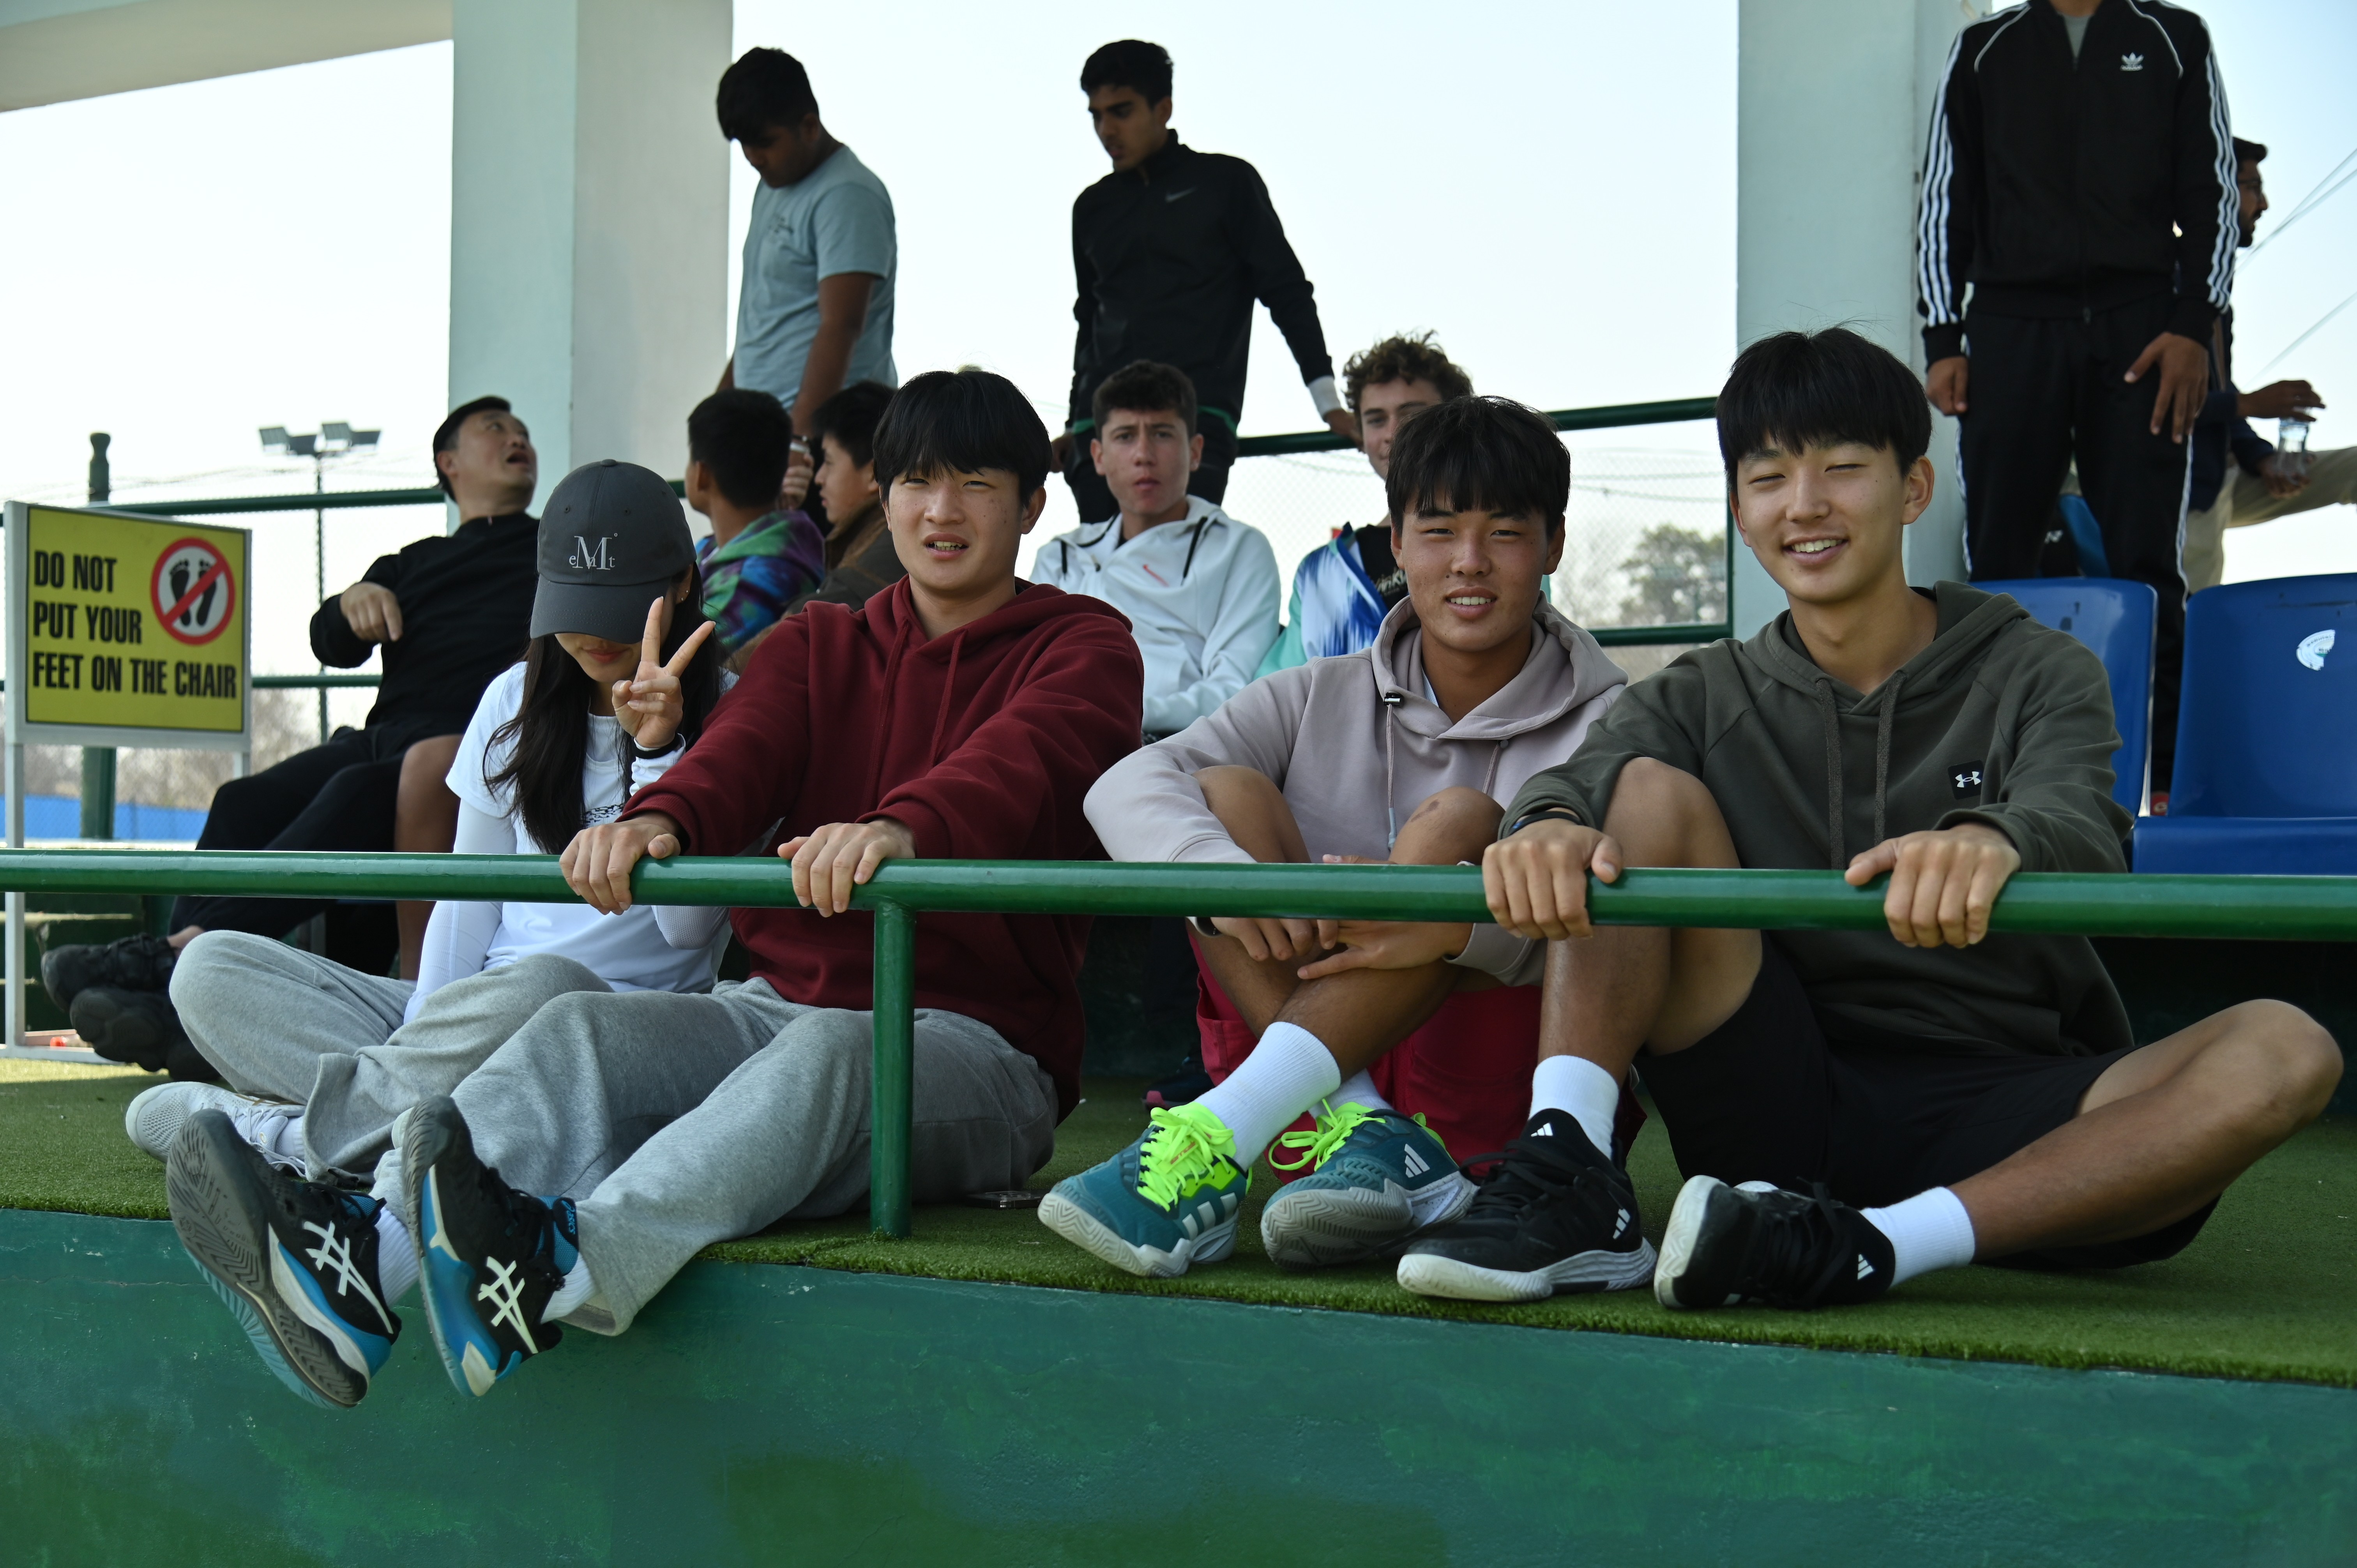 Participants enjoying the game